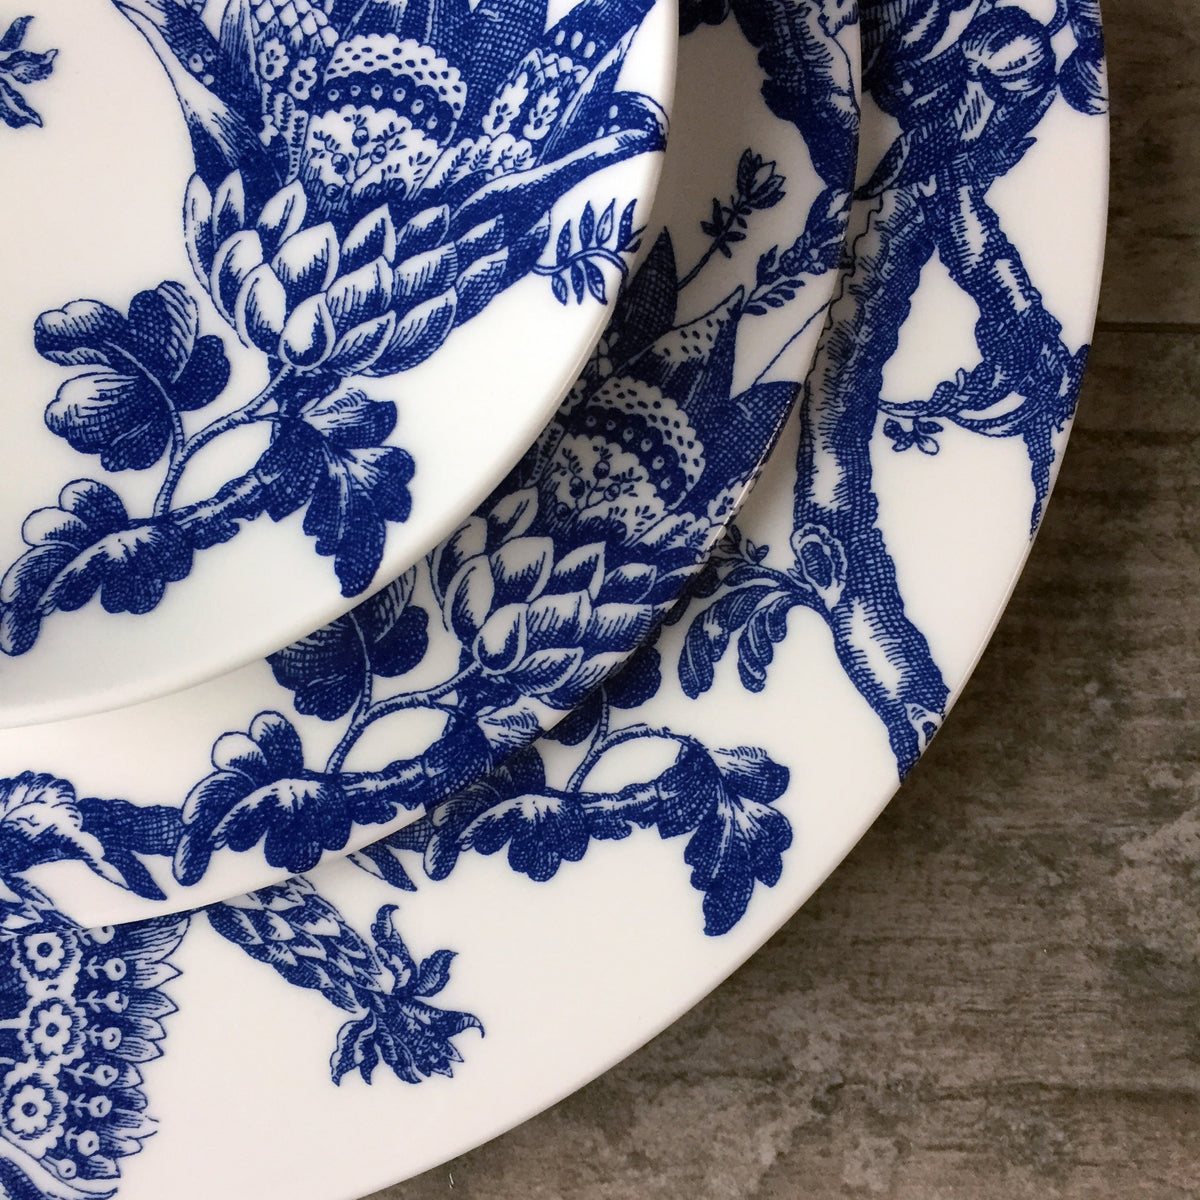 Close-up of three white ceramic plates with intricate blue graphic floral patterns, part of the Arcadia Rimmed Dinner Plate collection by Caskata Artisanal Home, stacked on top of each other on a wooden surface.